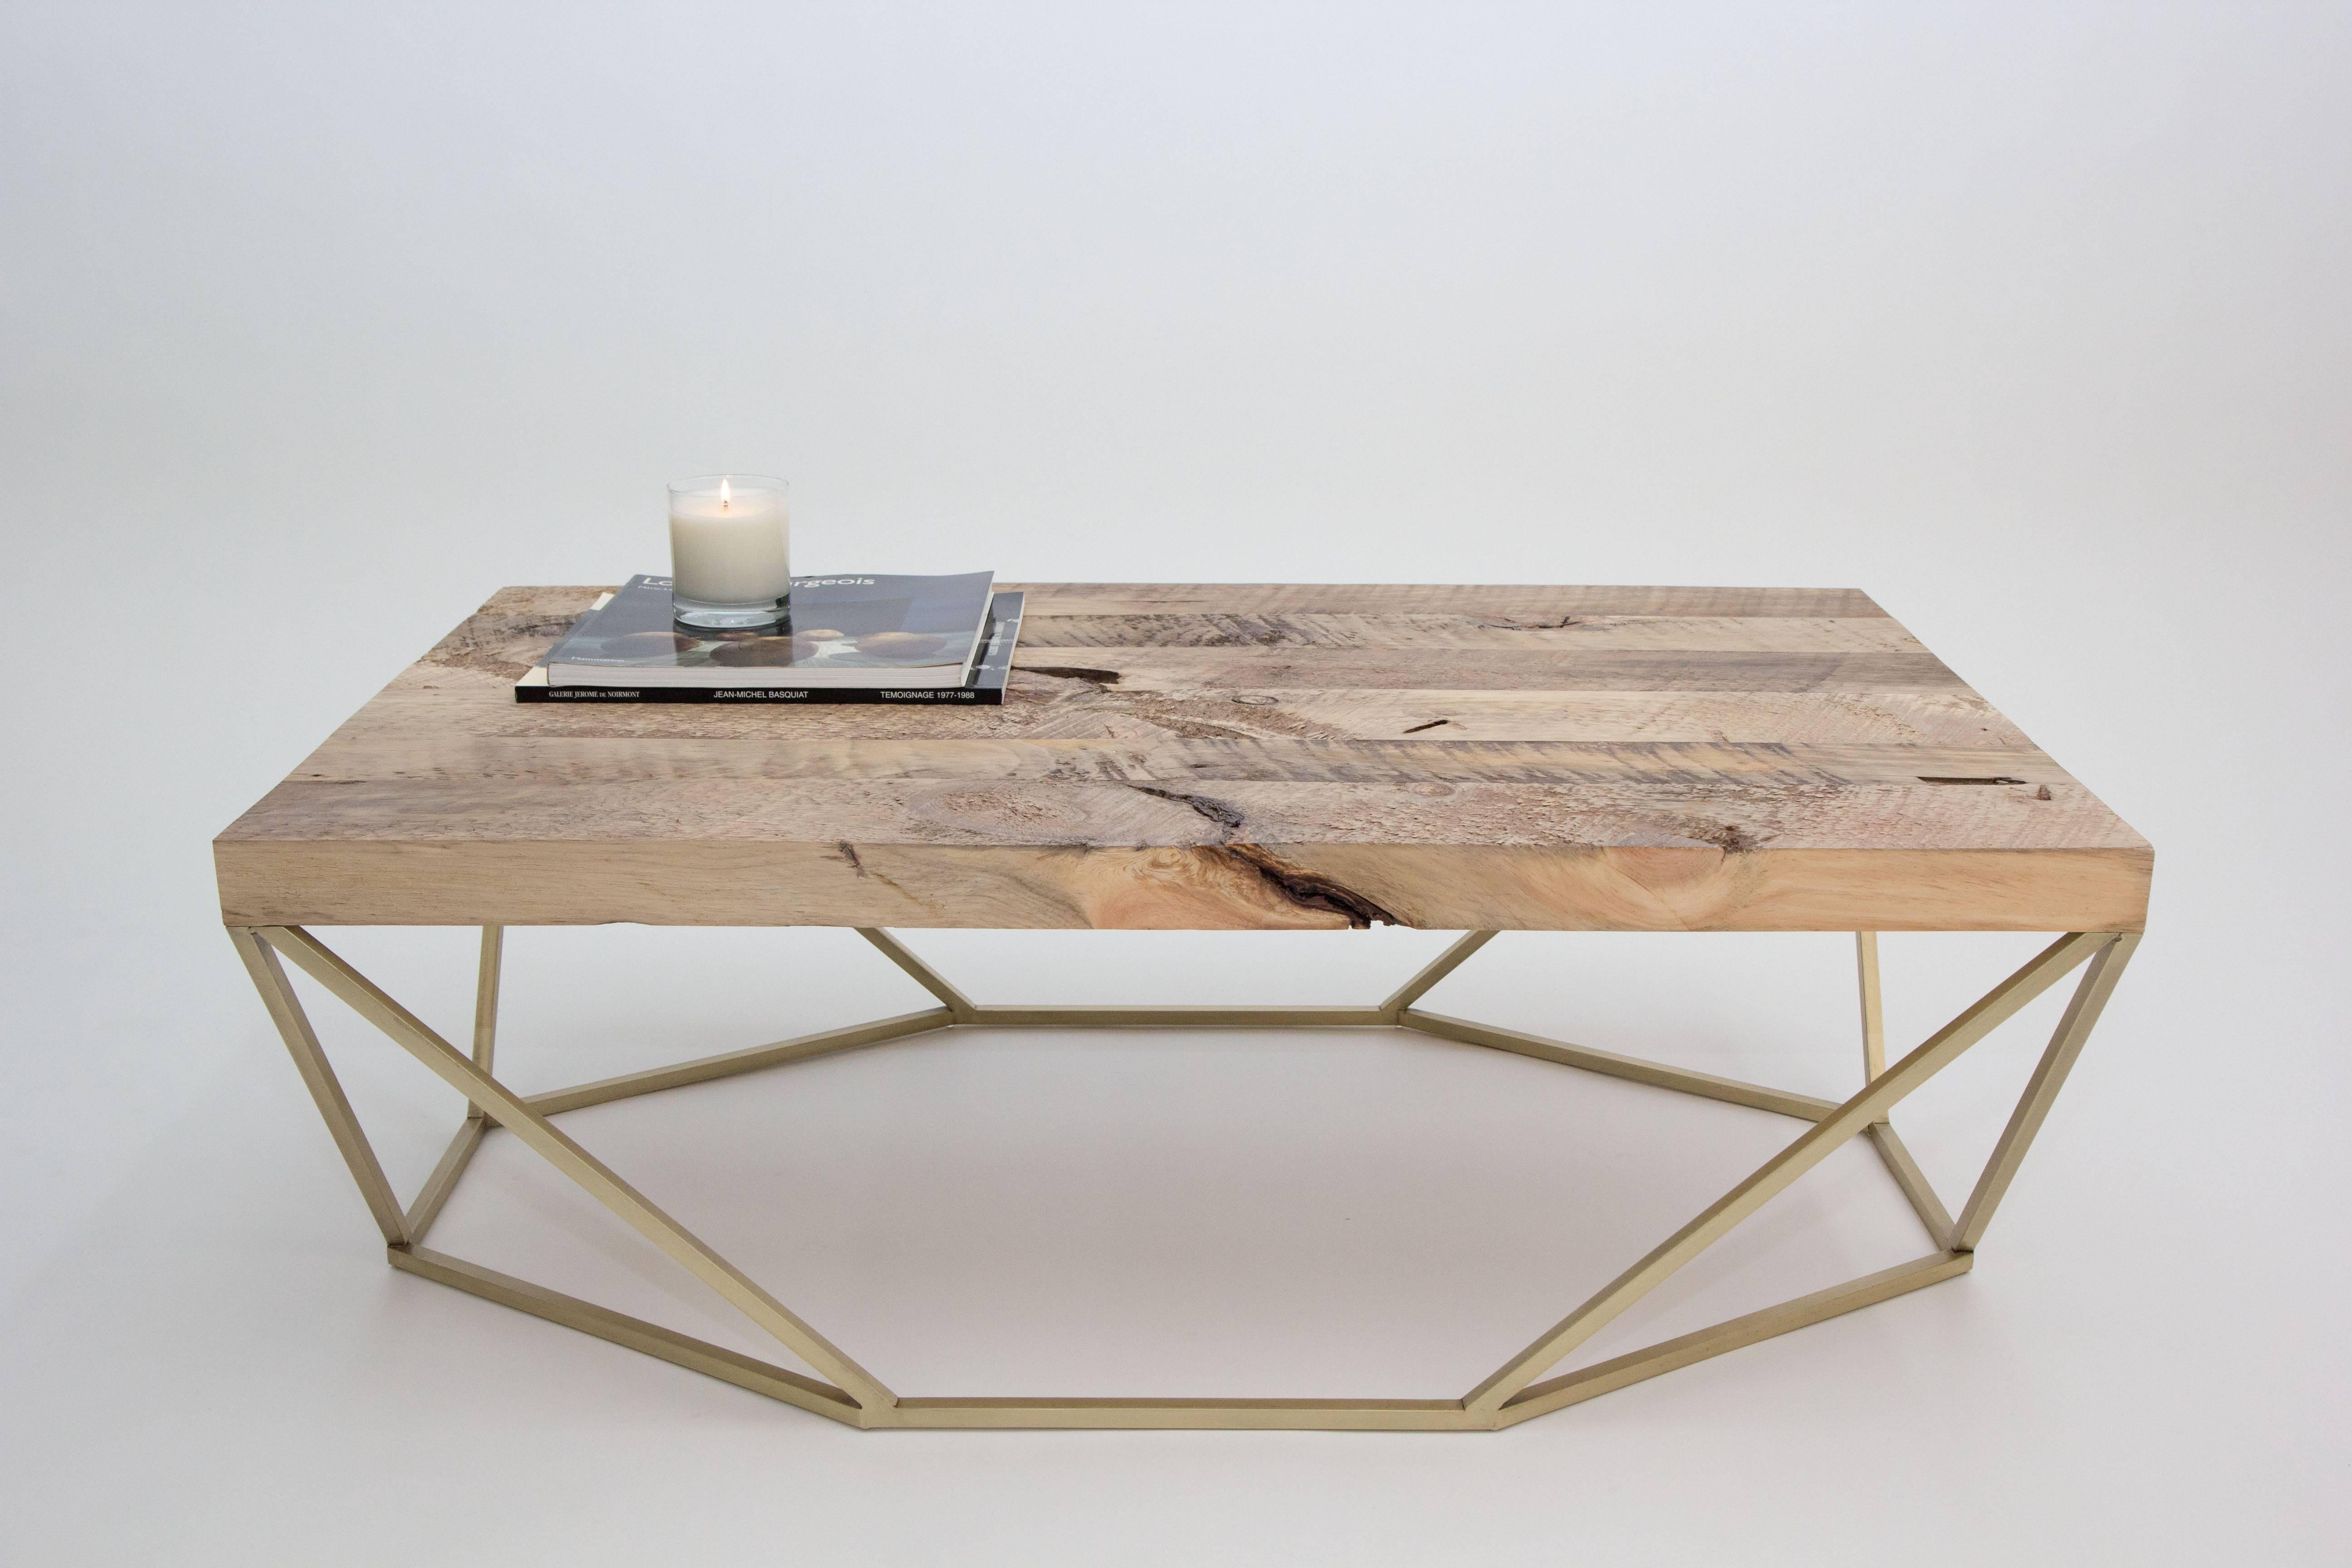 The original finish combination for the dusk coffee table features a geometric solid polished-brass base with a rich salvaged-wood tabletop. 

The octagon-meets-rectangle shape transforms when viewed from different angles. The Dusk Coffee Table